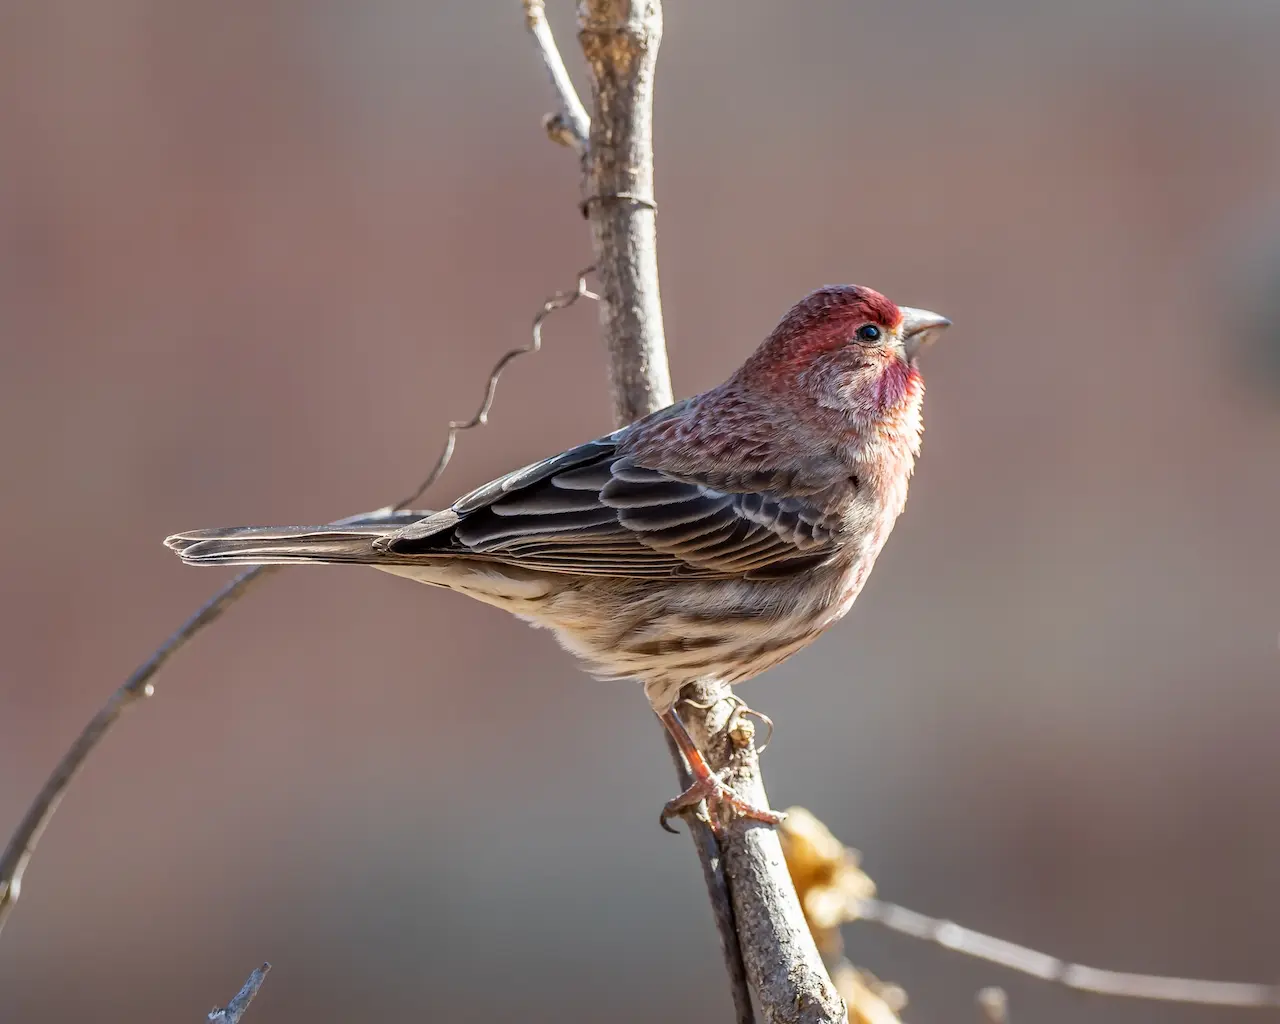 The House Finches Perched In A Branch